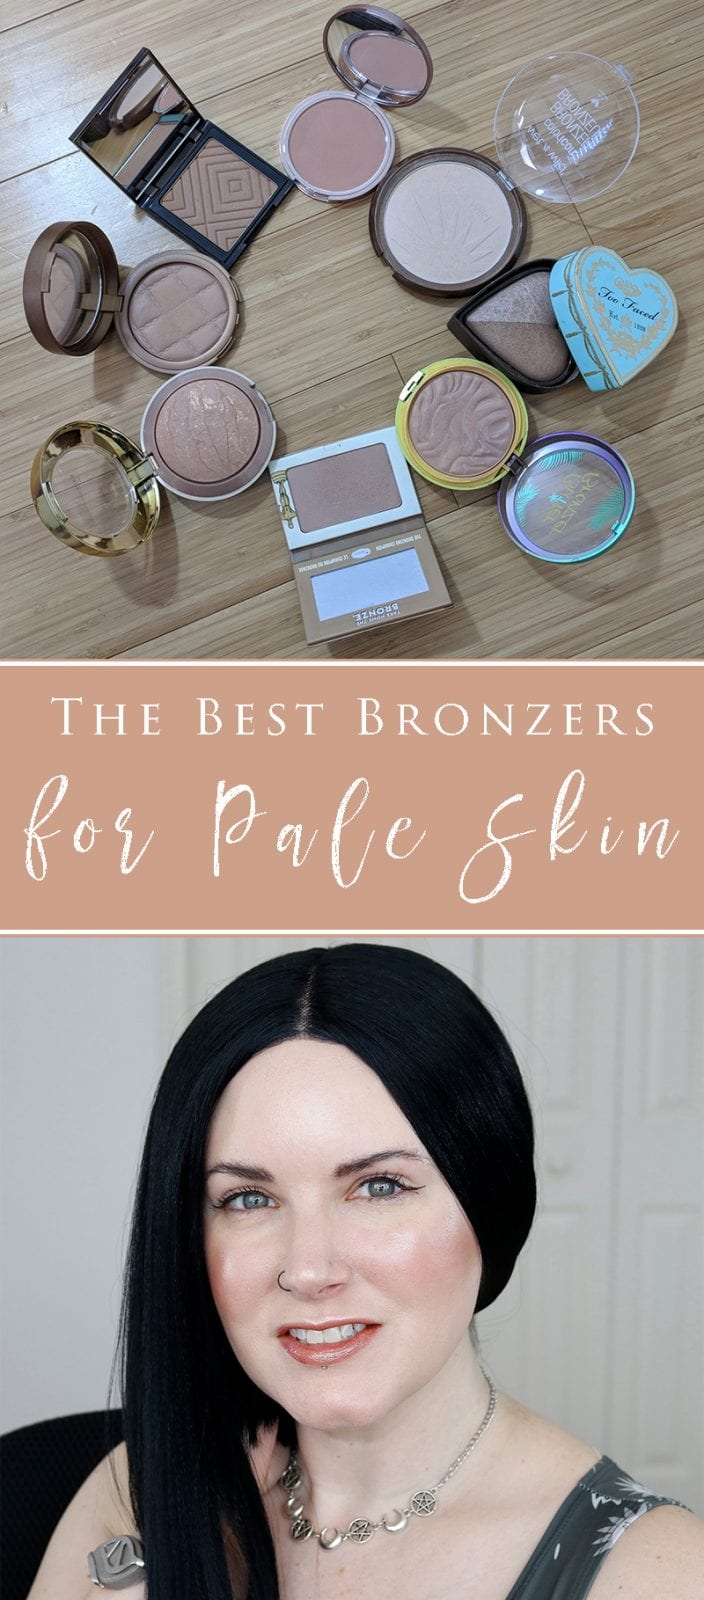 The Best Bronzers for Skin - Search for Bronzer Ends Here!